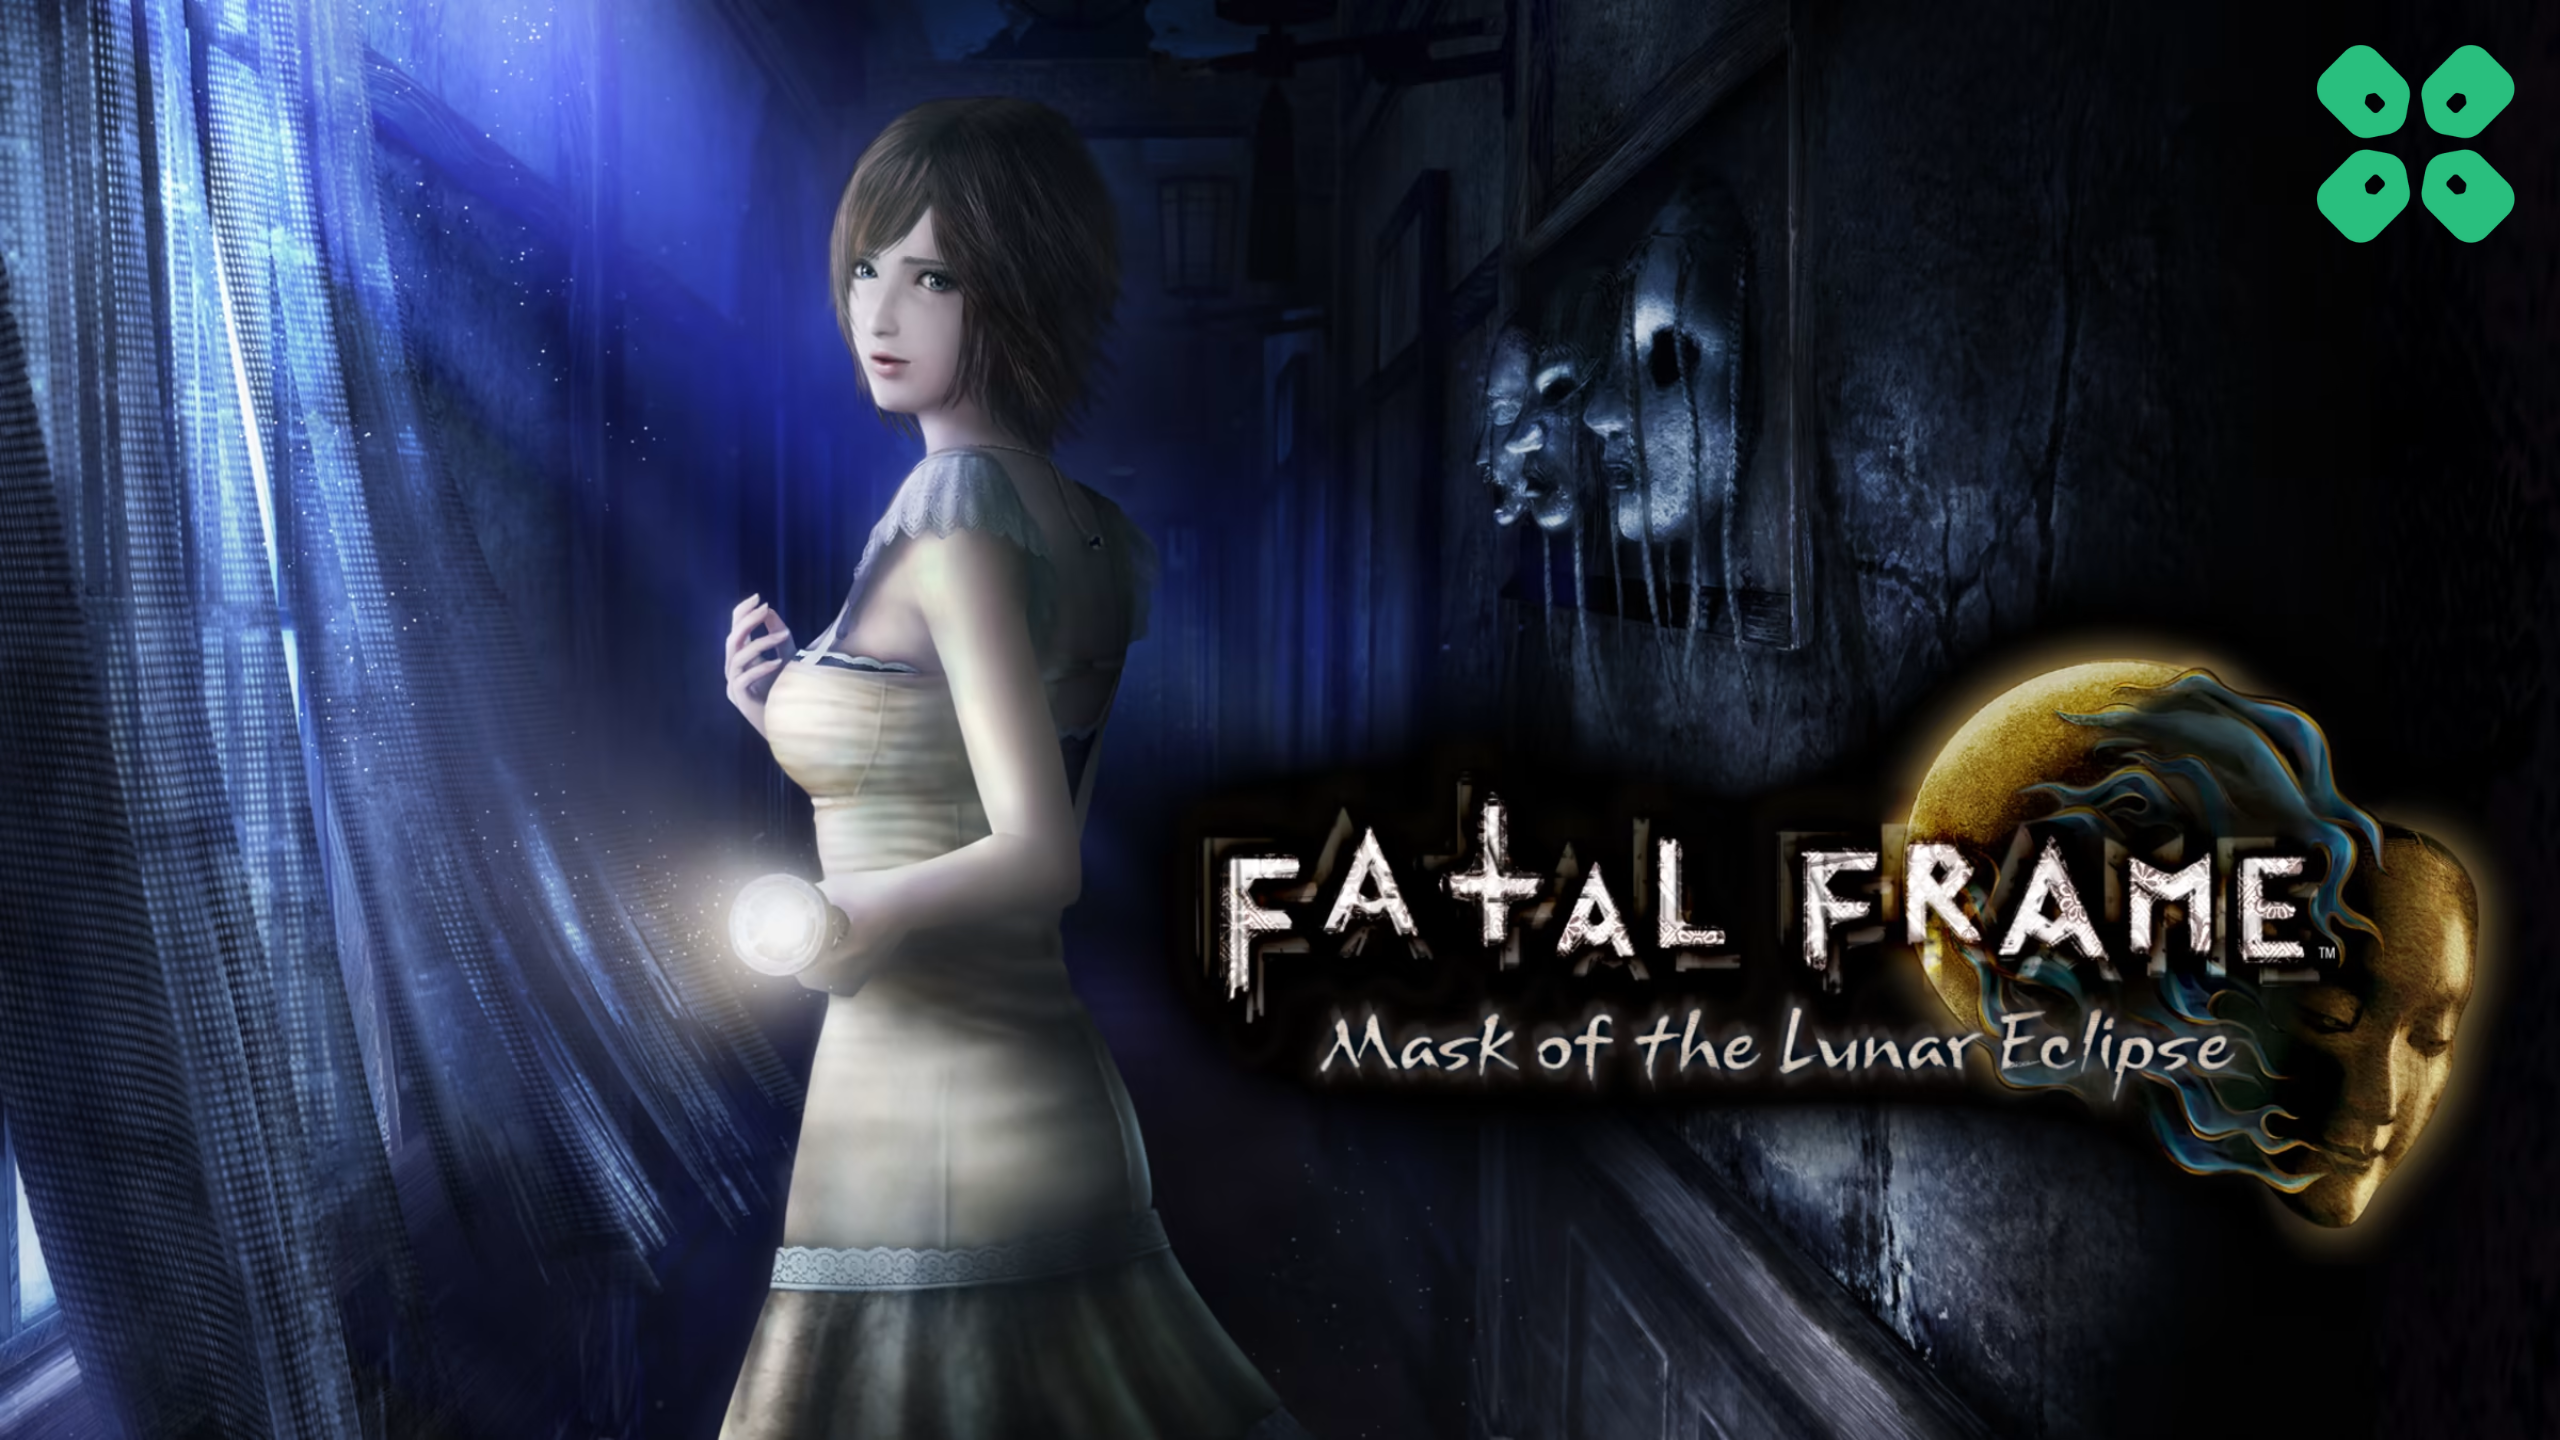 What to Know Before Playing Fatal Frame Mask of the Lunar Eclipse